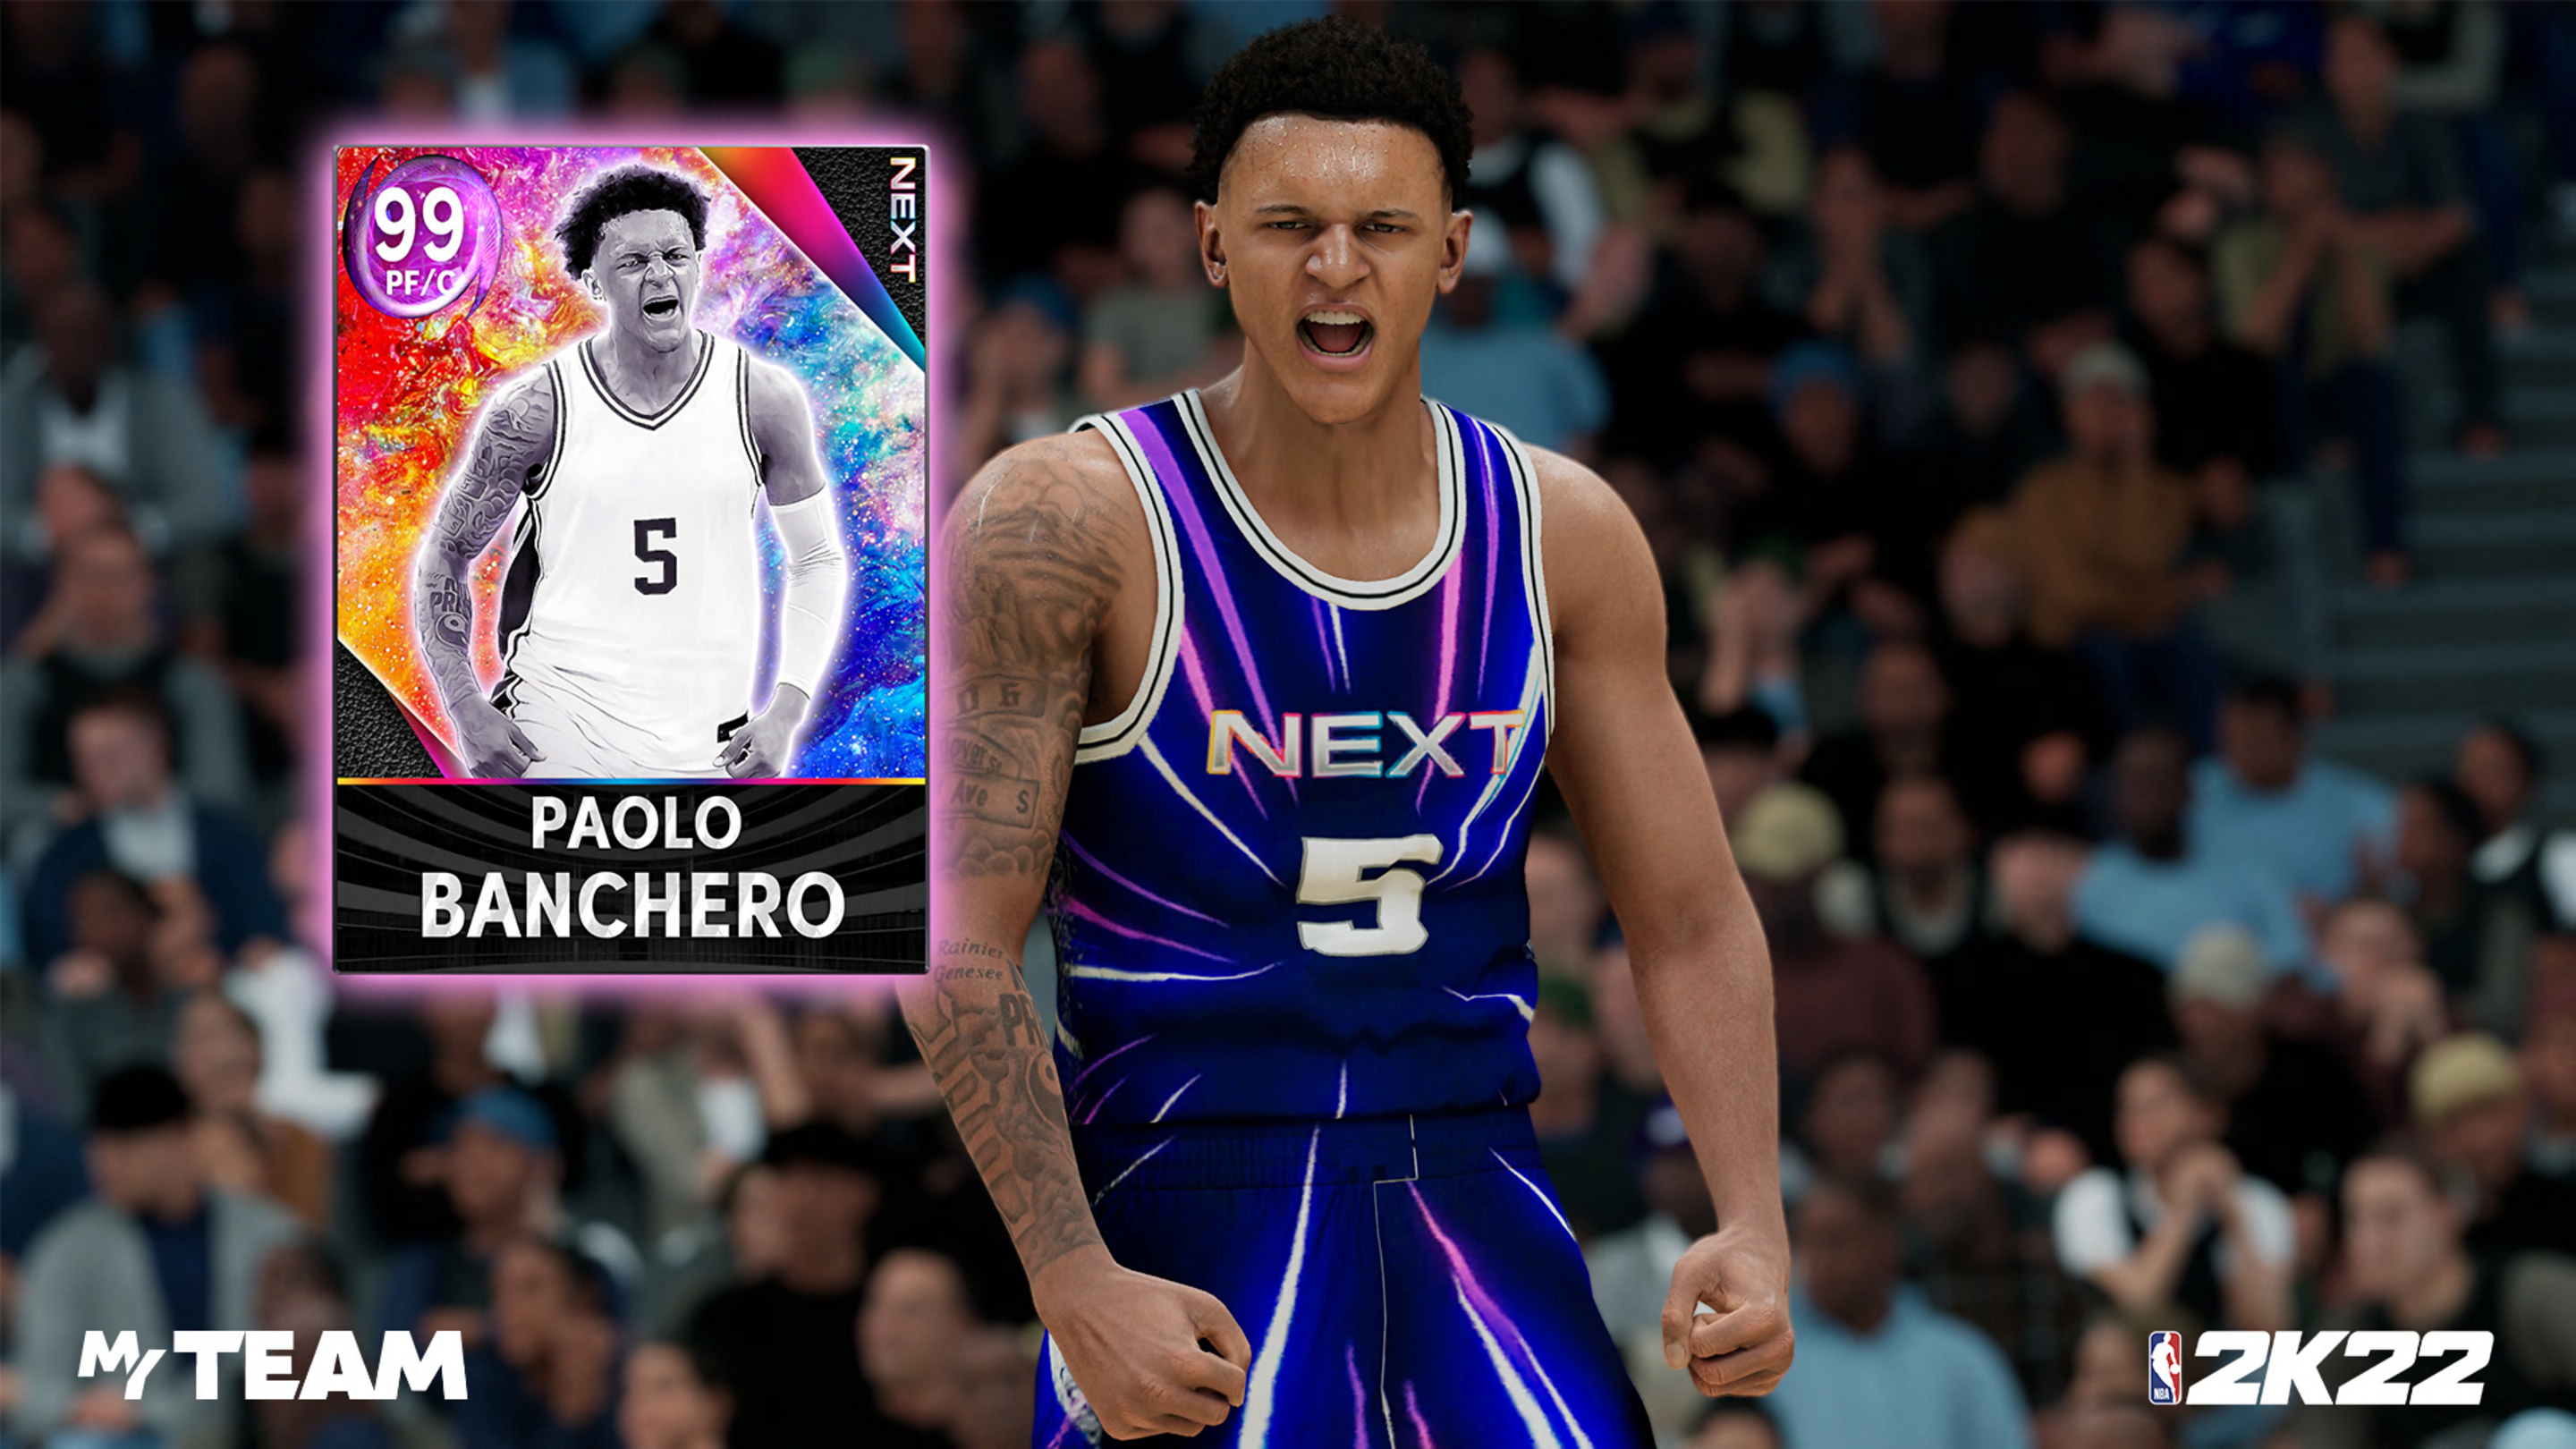 NBA 2K22 Update 1.017 Hits the Court for Next-Gen This June 28